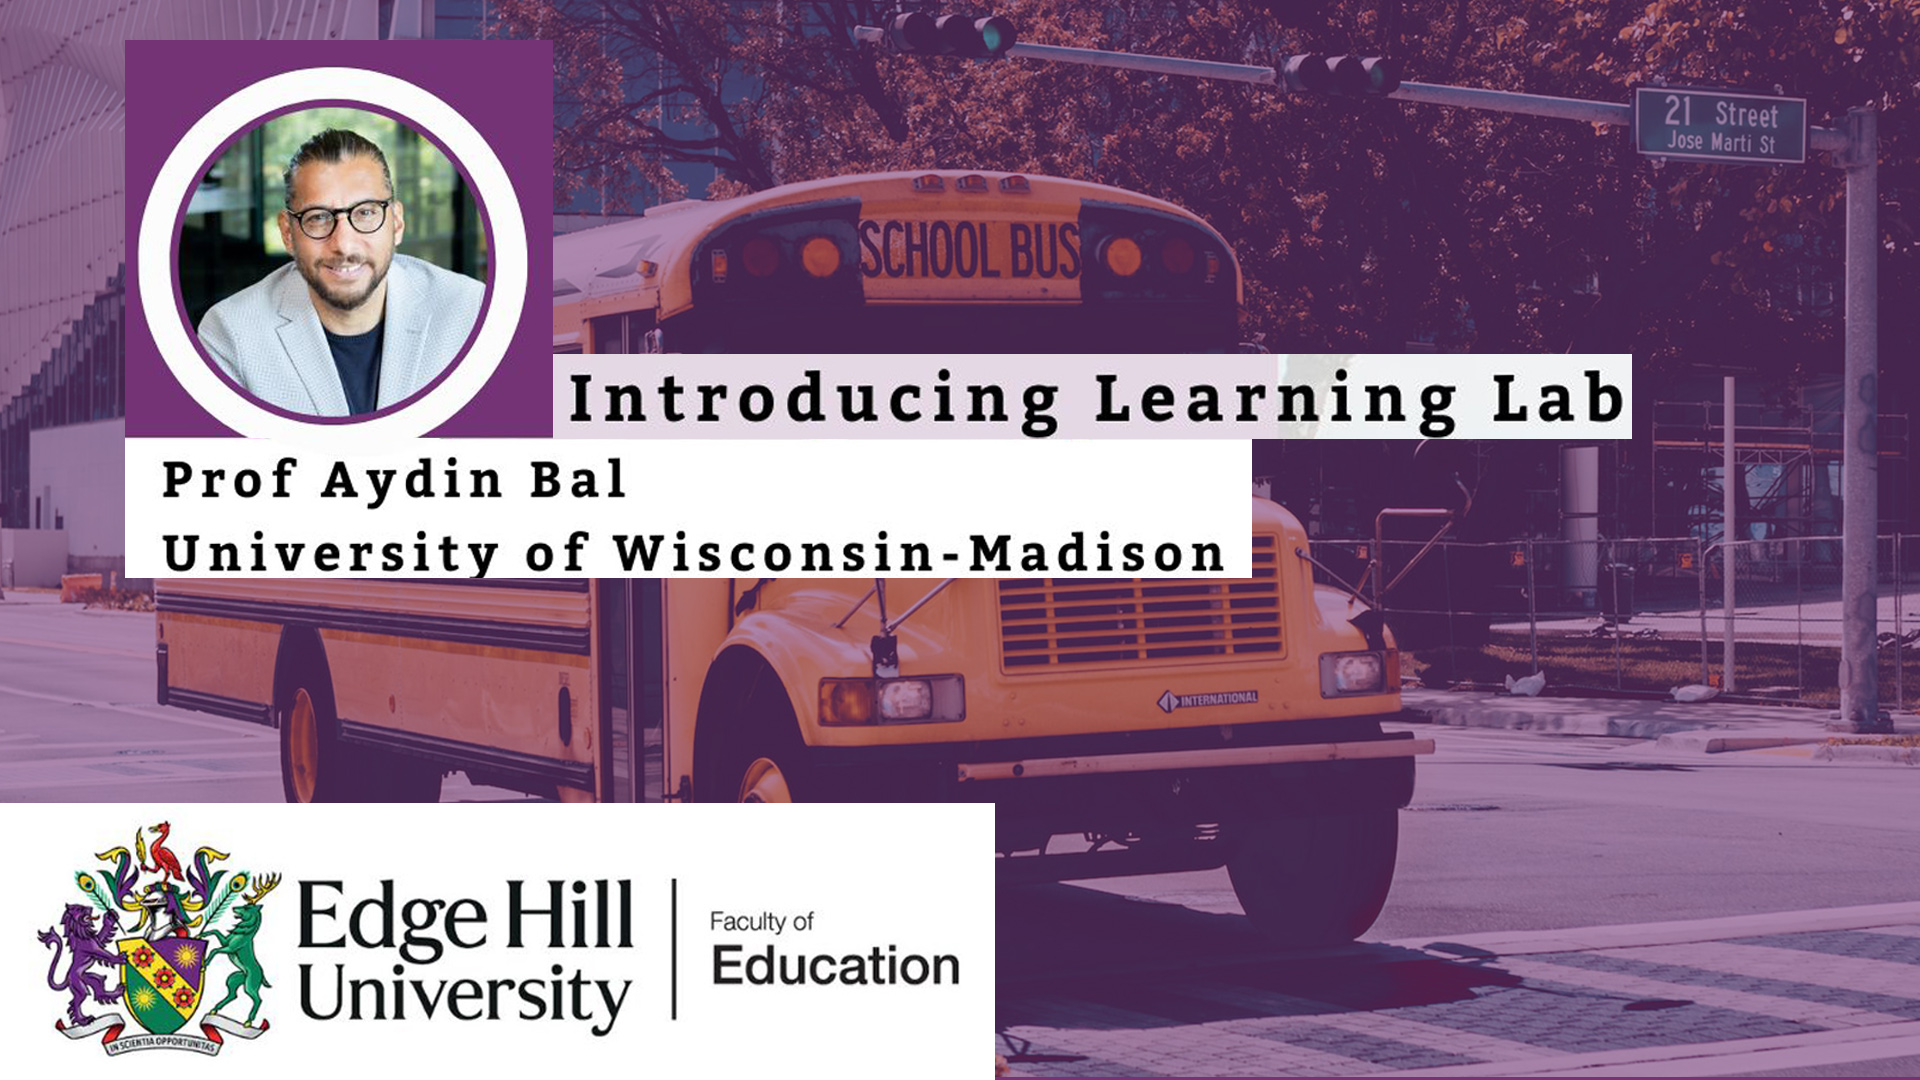 Graphic image of a yellow school bus with the text 'Introducing Learning Lab' and a photo of Professor Aydin Bal